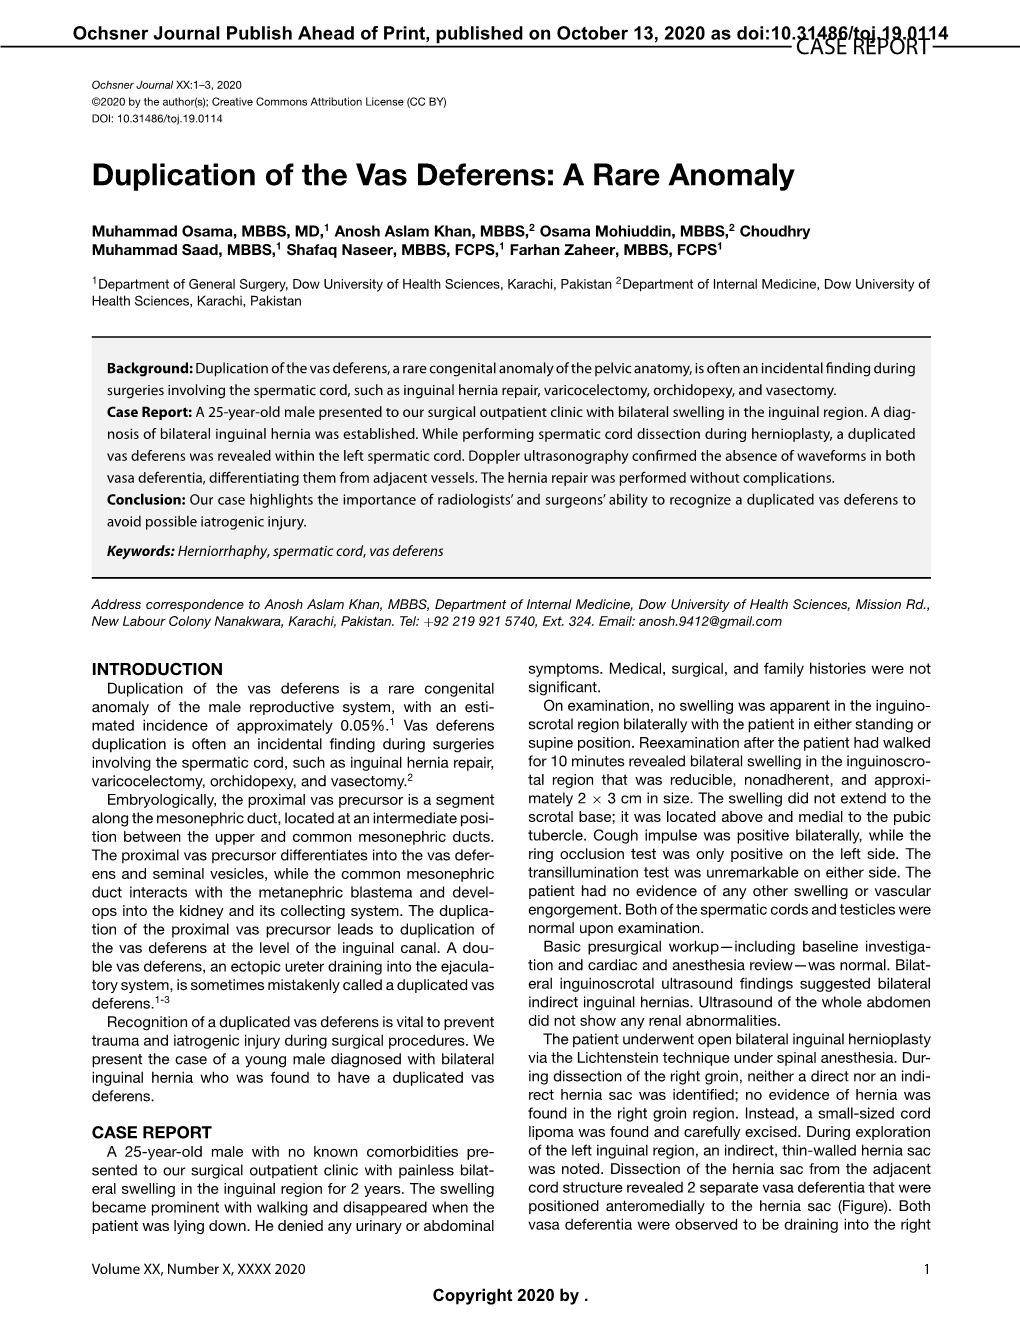 Duplication of the Vas Deferens: a Rare Anomaly